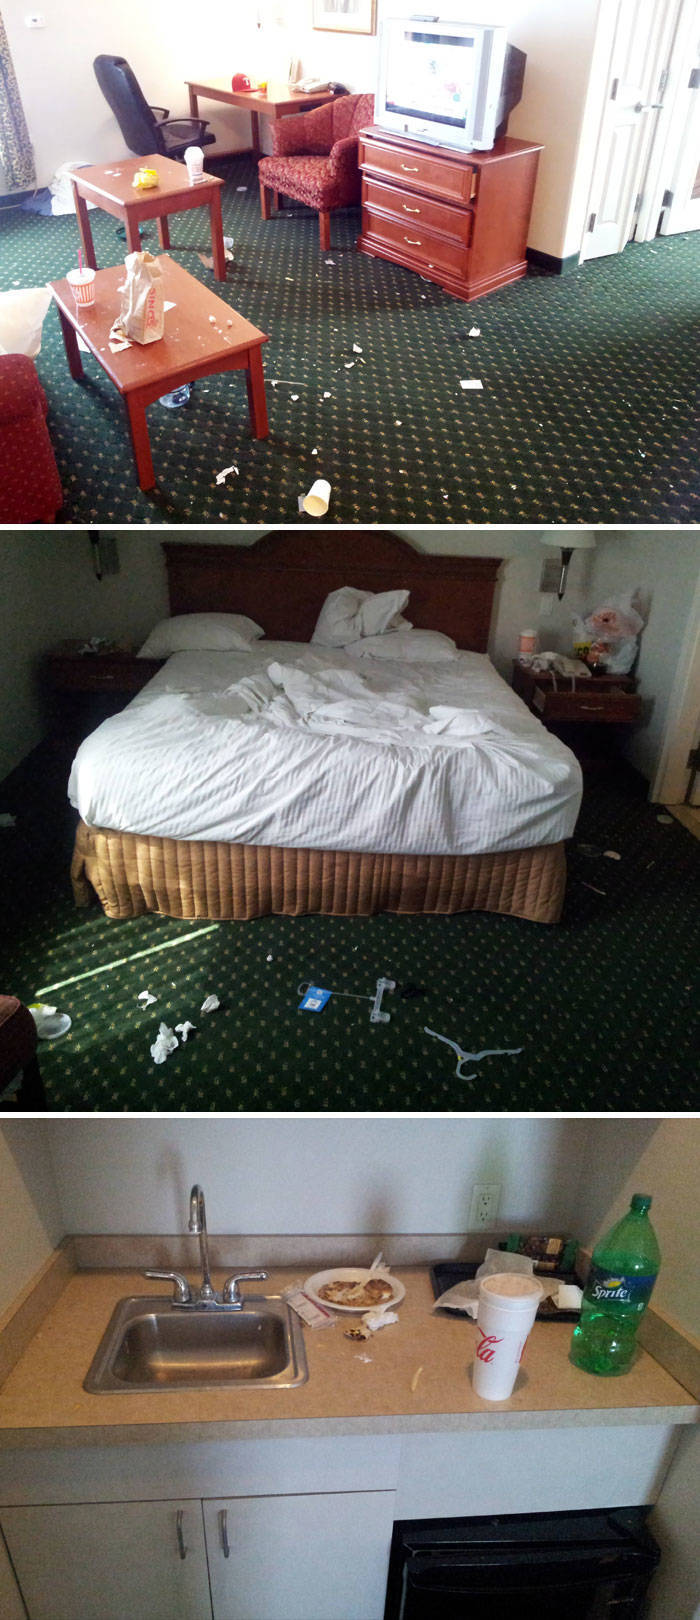 Some Hotel And Airbnb Guests Are Just The Worst